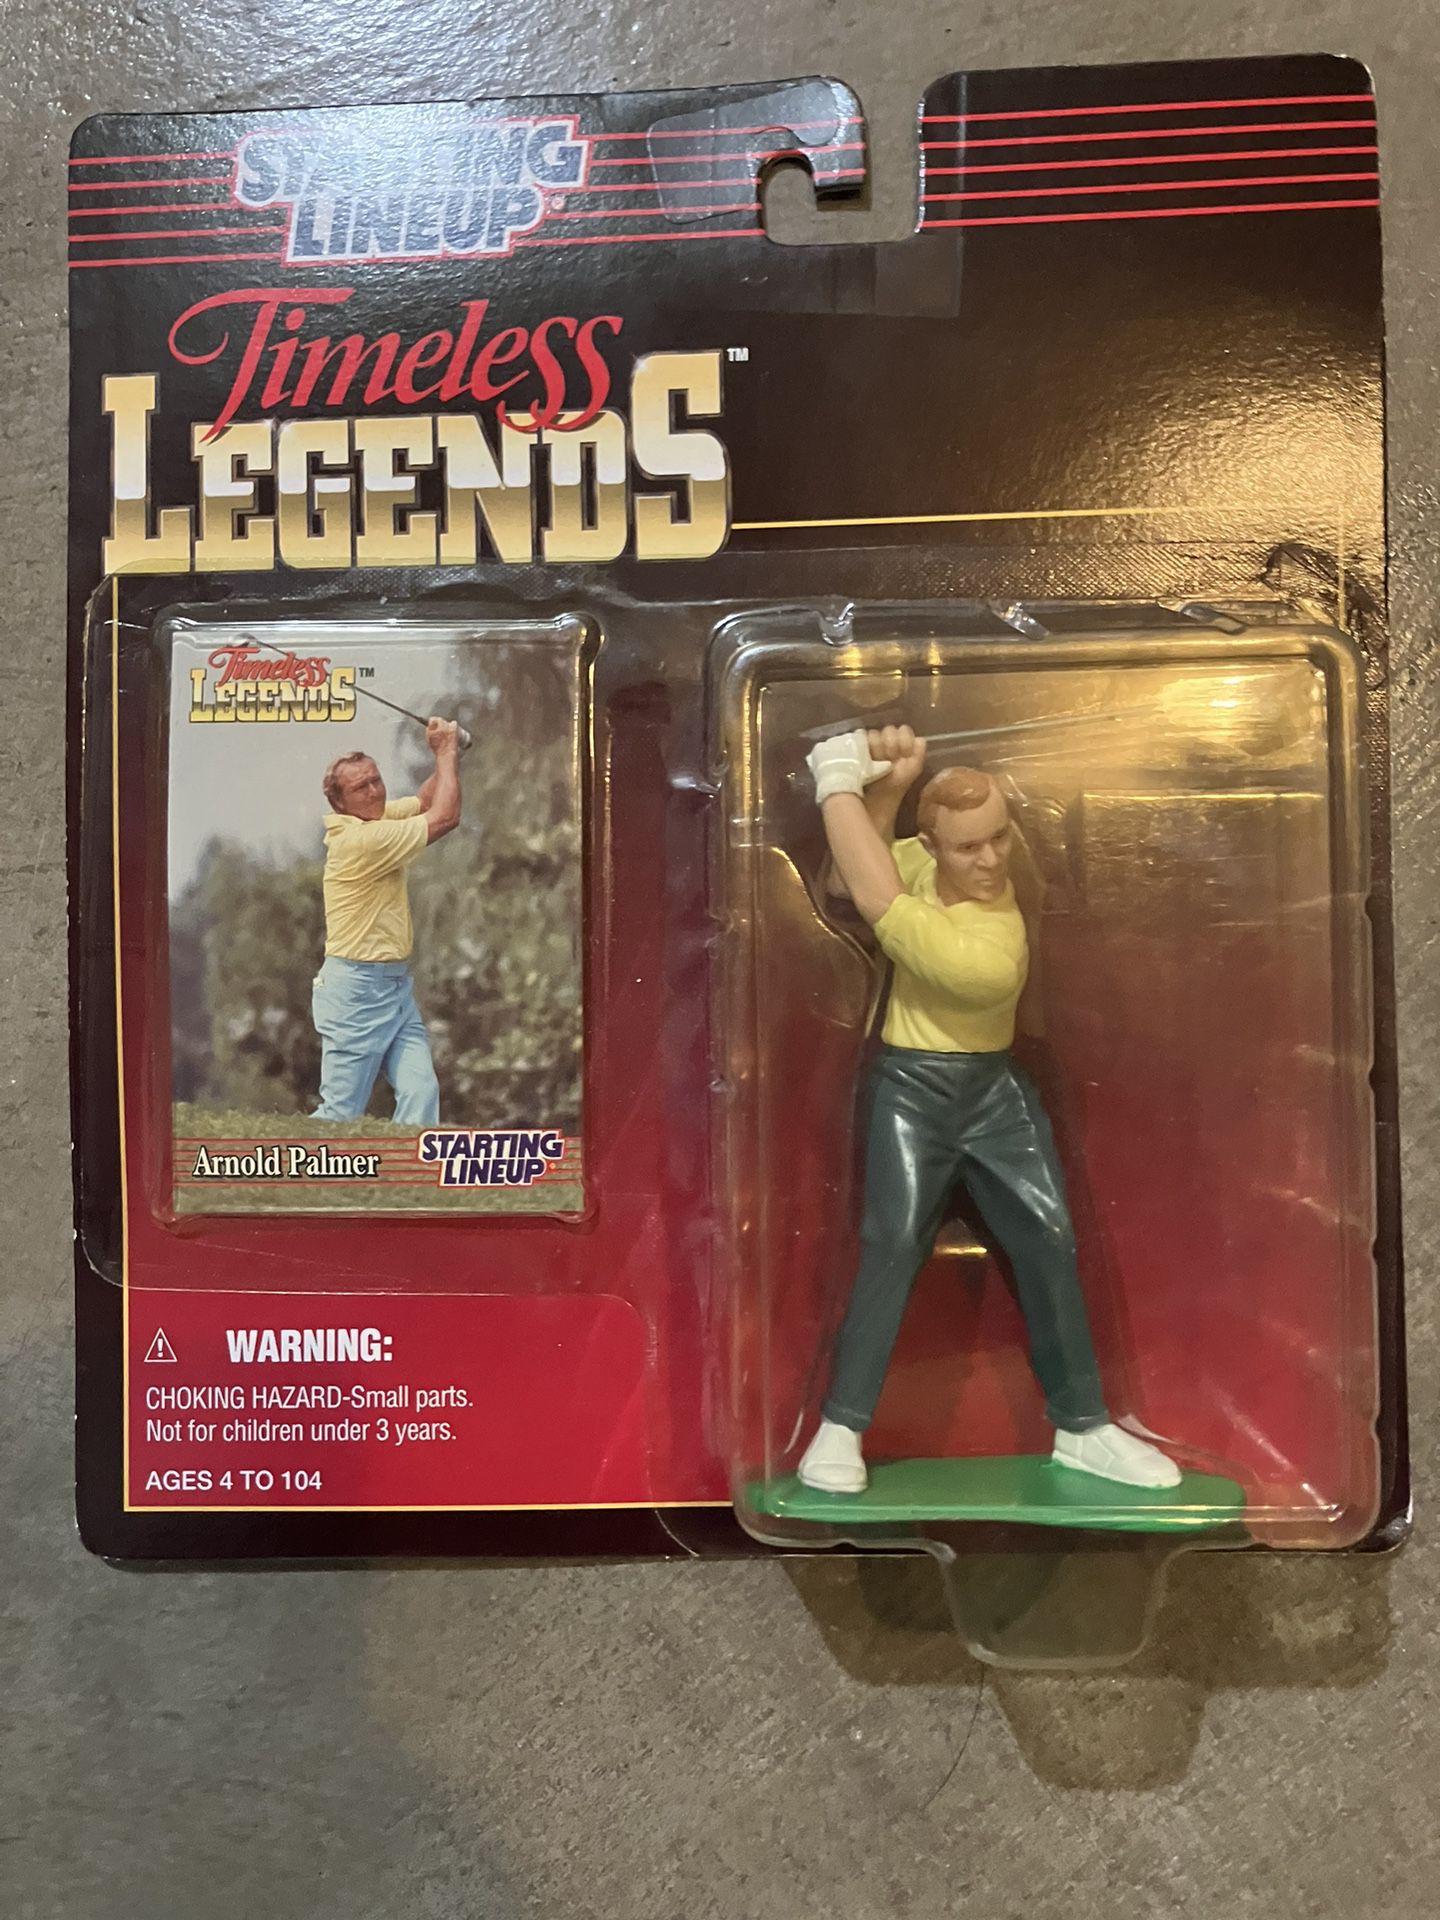 Collectible Action Figure Of Arnold Palmer